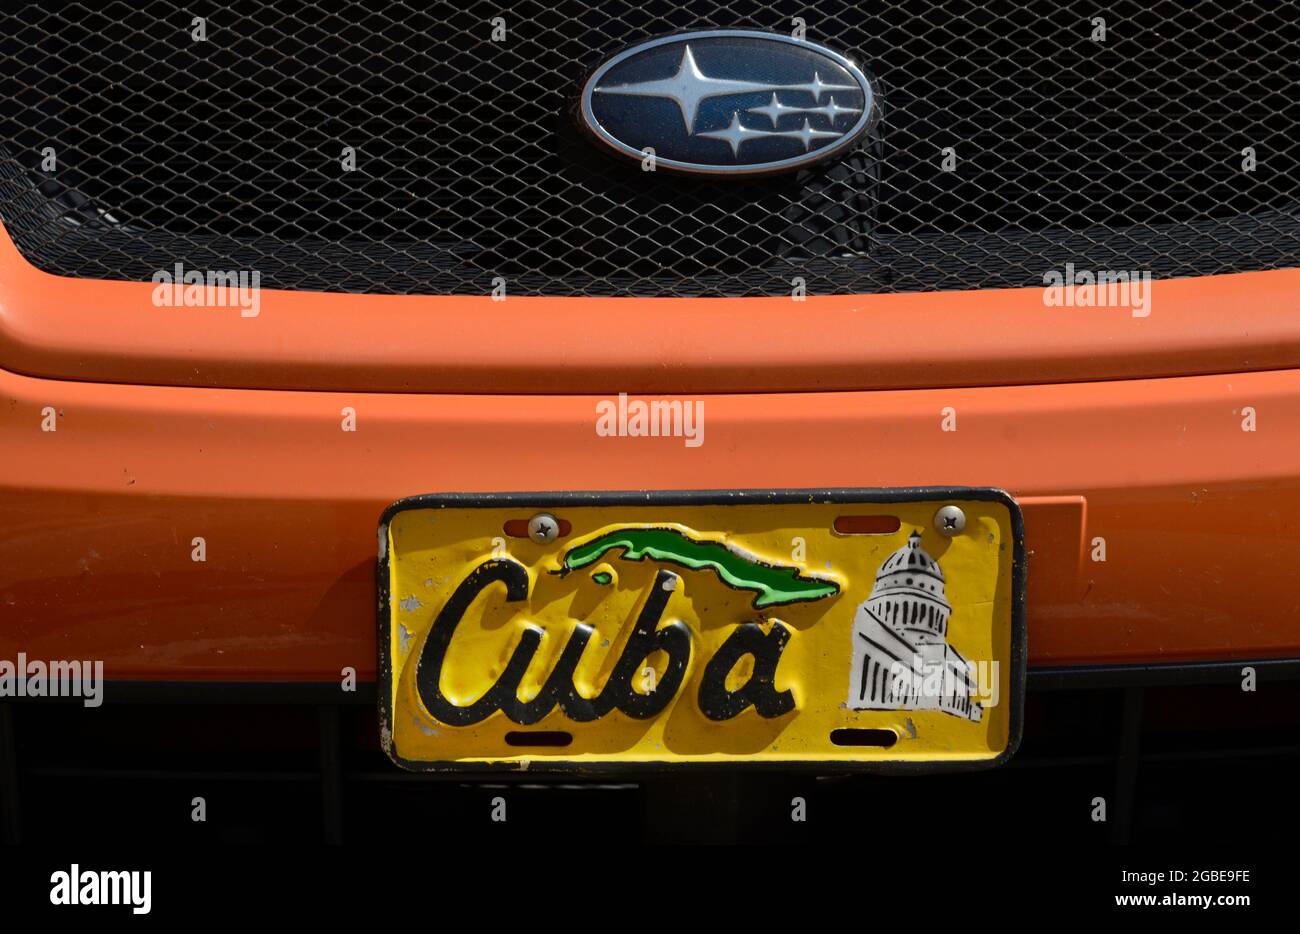 A vintage decorative front license plate from Cuba on an American car in Santa Fe, New Mexico. Stock Photo